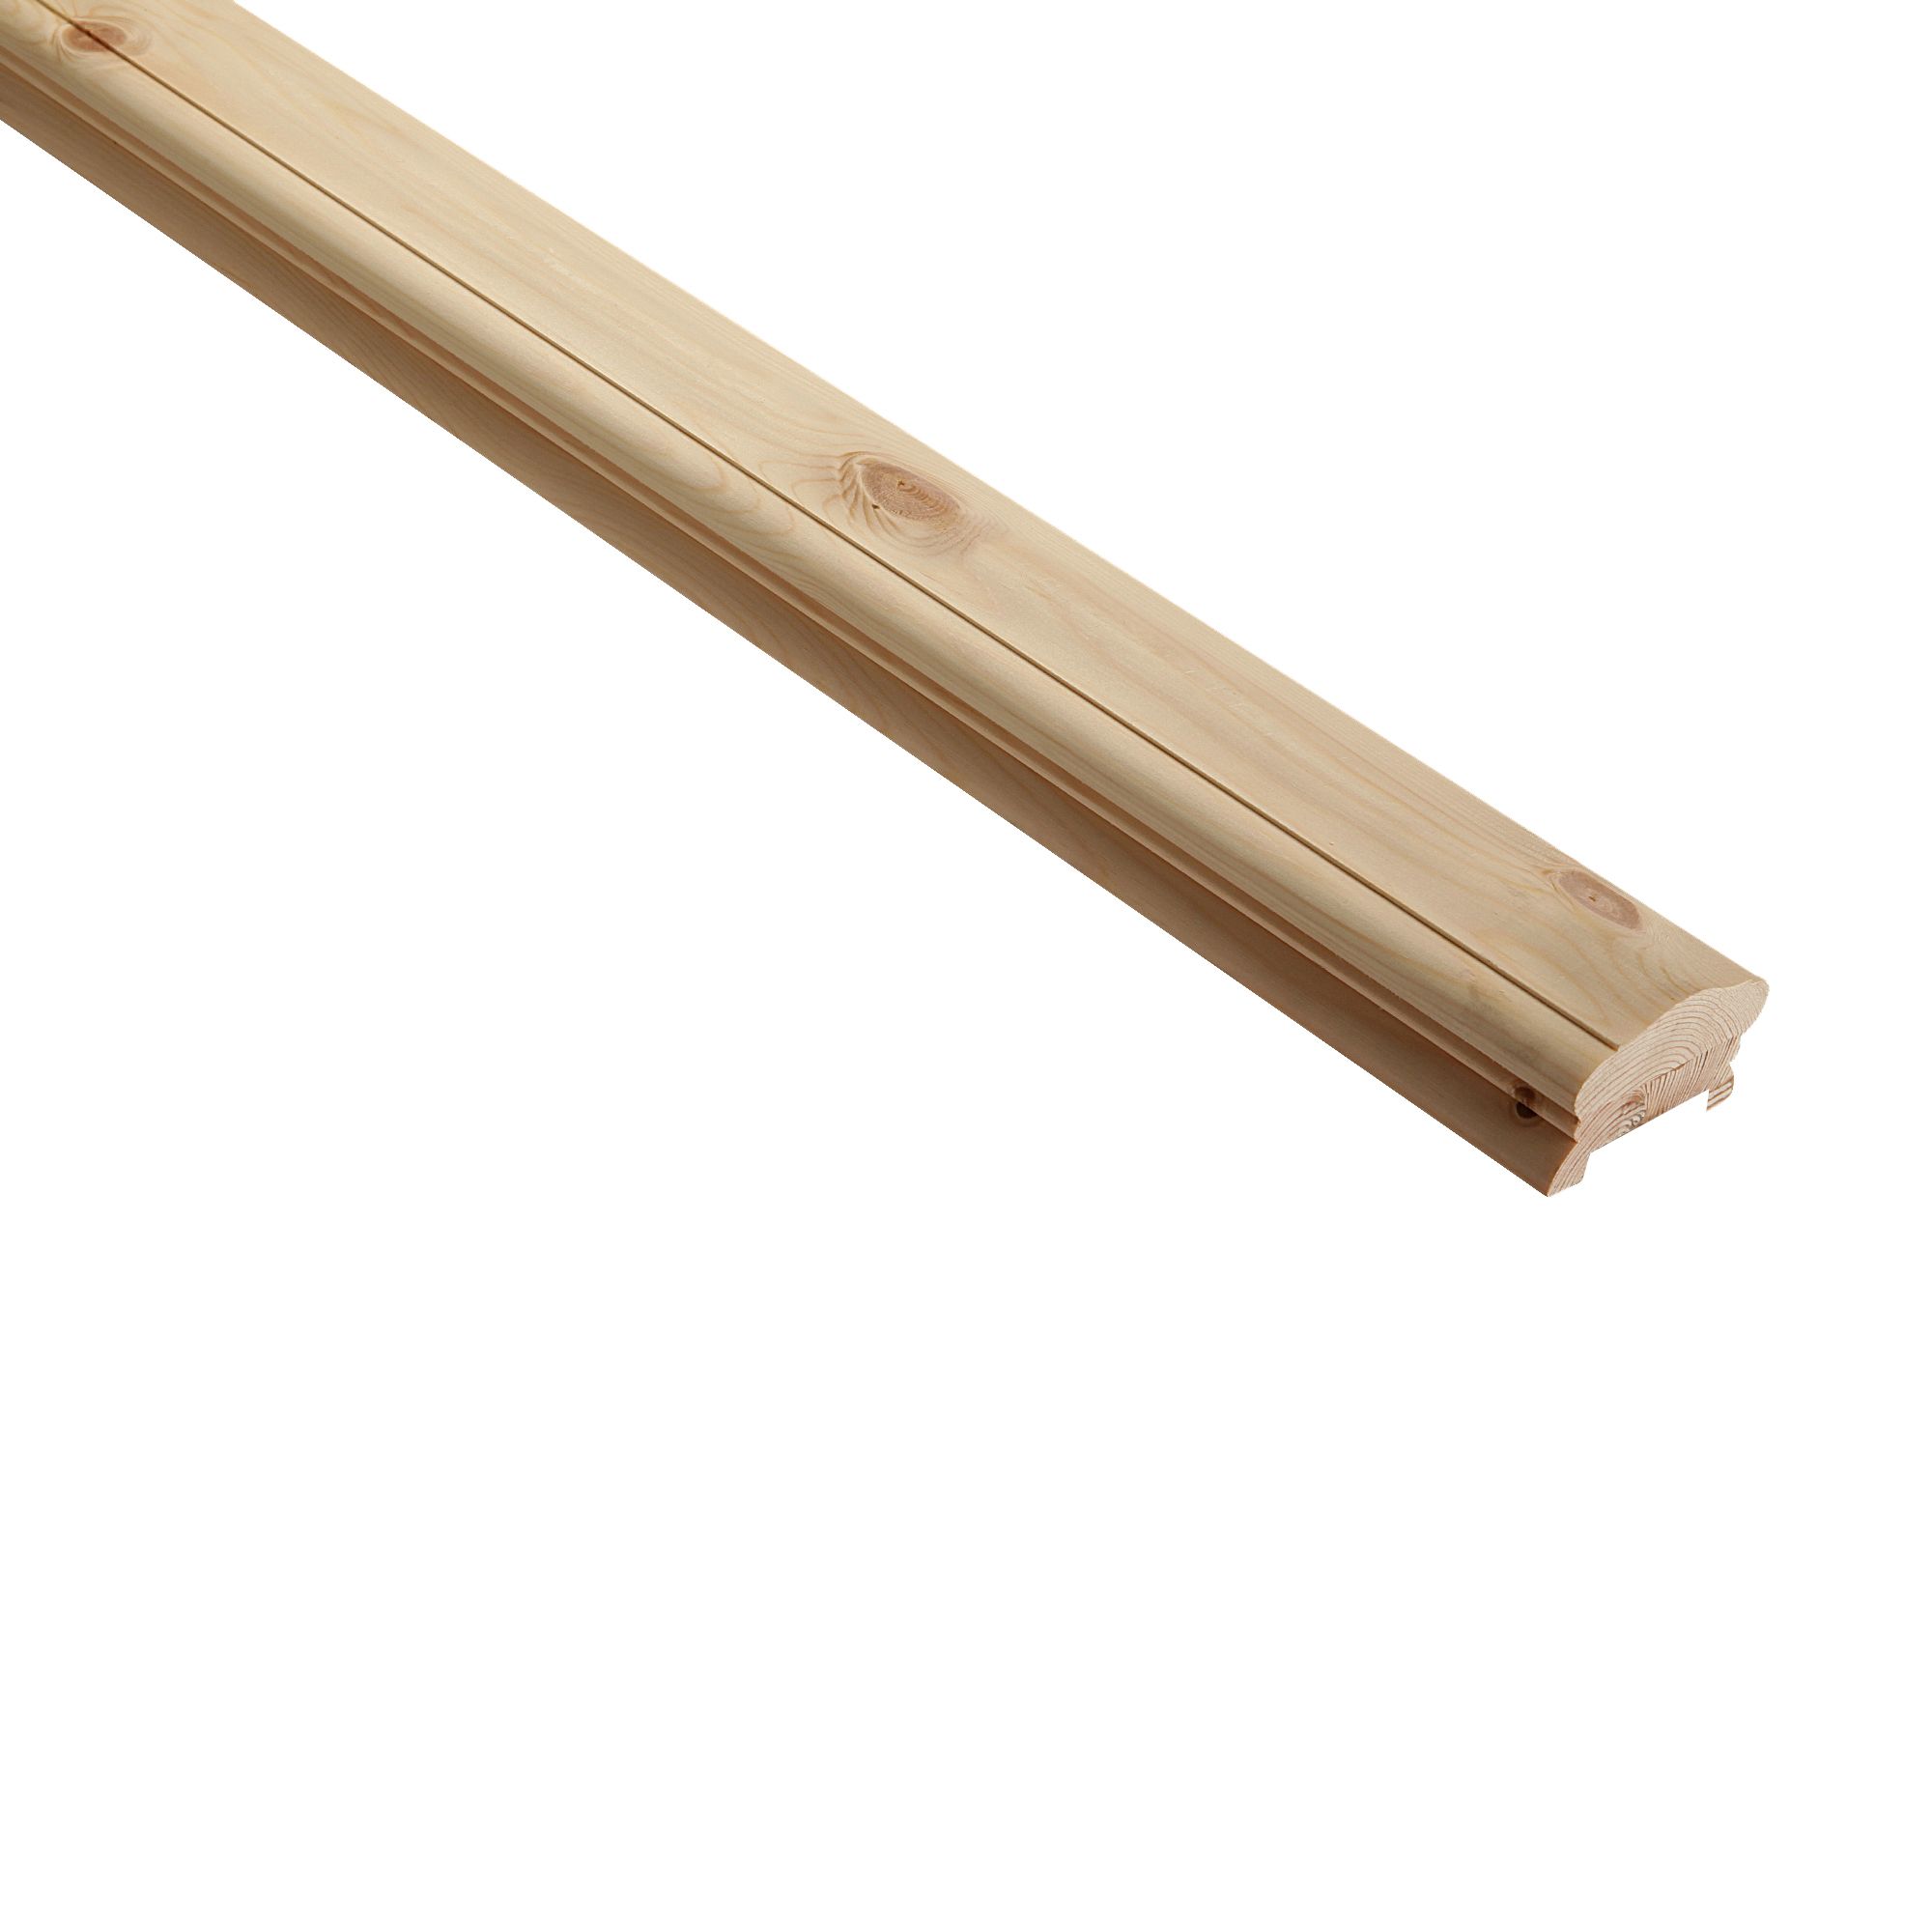 Cheshire Mouldings Colonial Pine 41mm Light Handrail, (L)4.2M (W)62mm